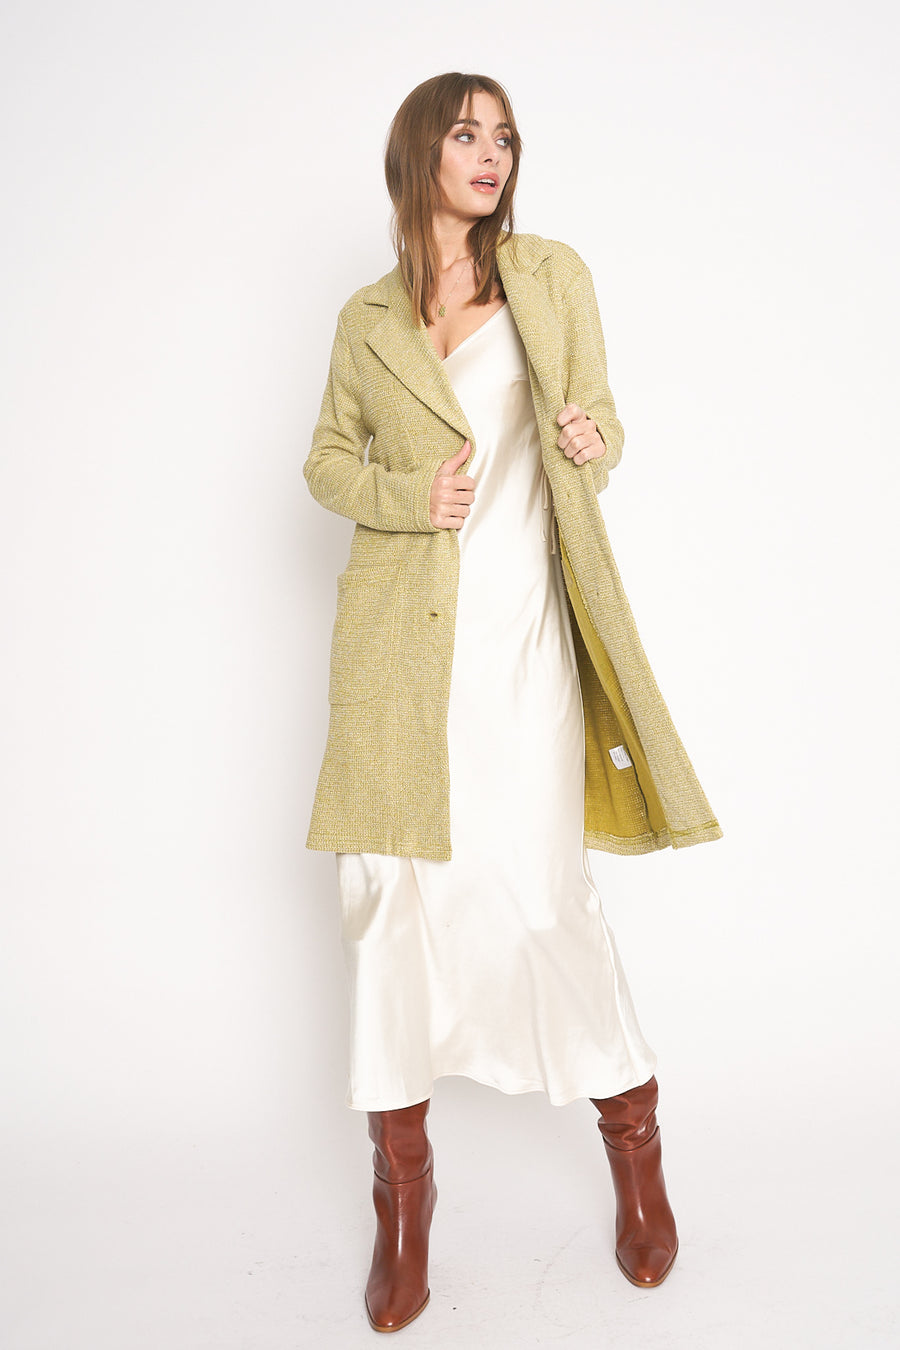 No Srcipt image - Images of 2 of 7 Knit Duster Long Jacket Green Olive Oil Color Double Side Pockets